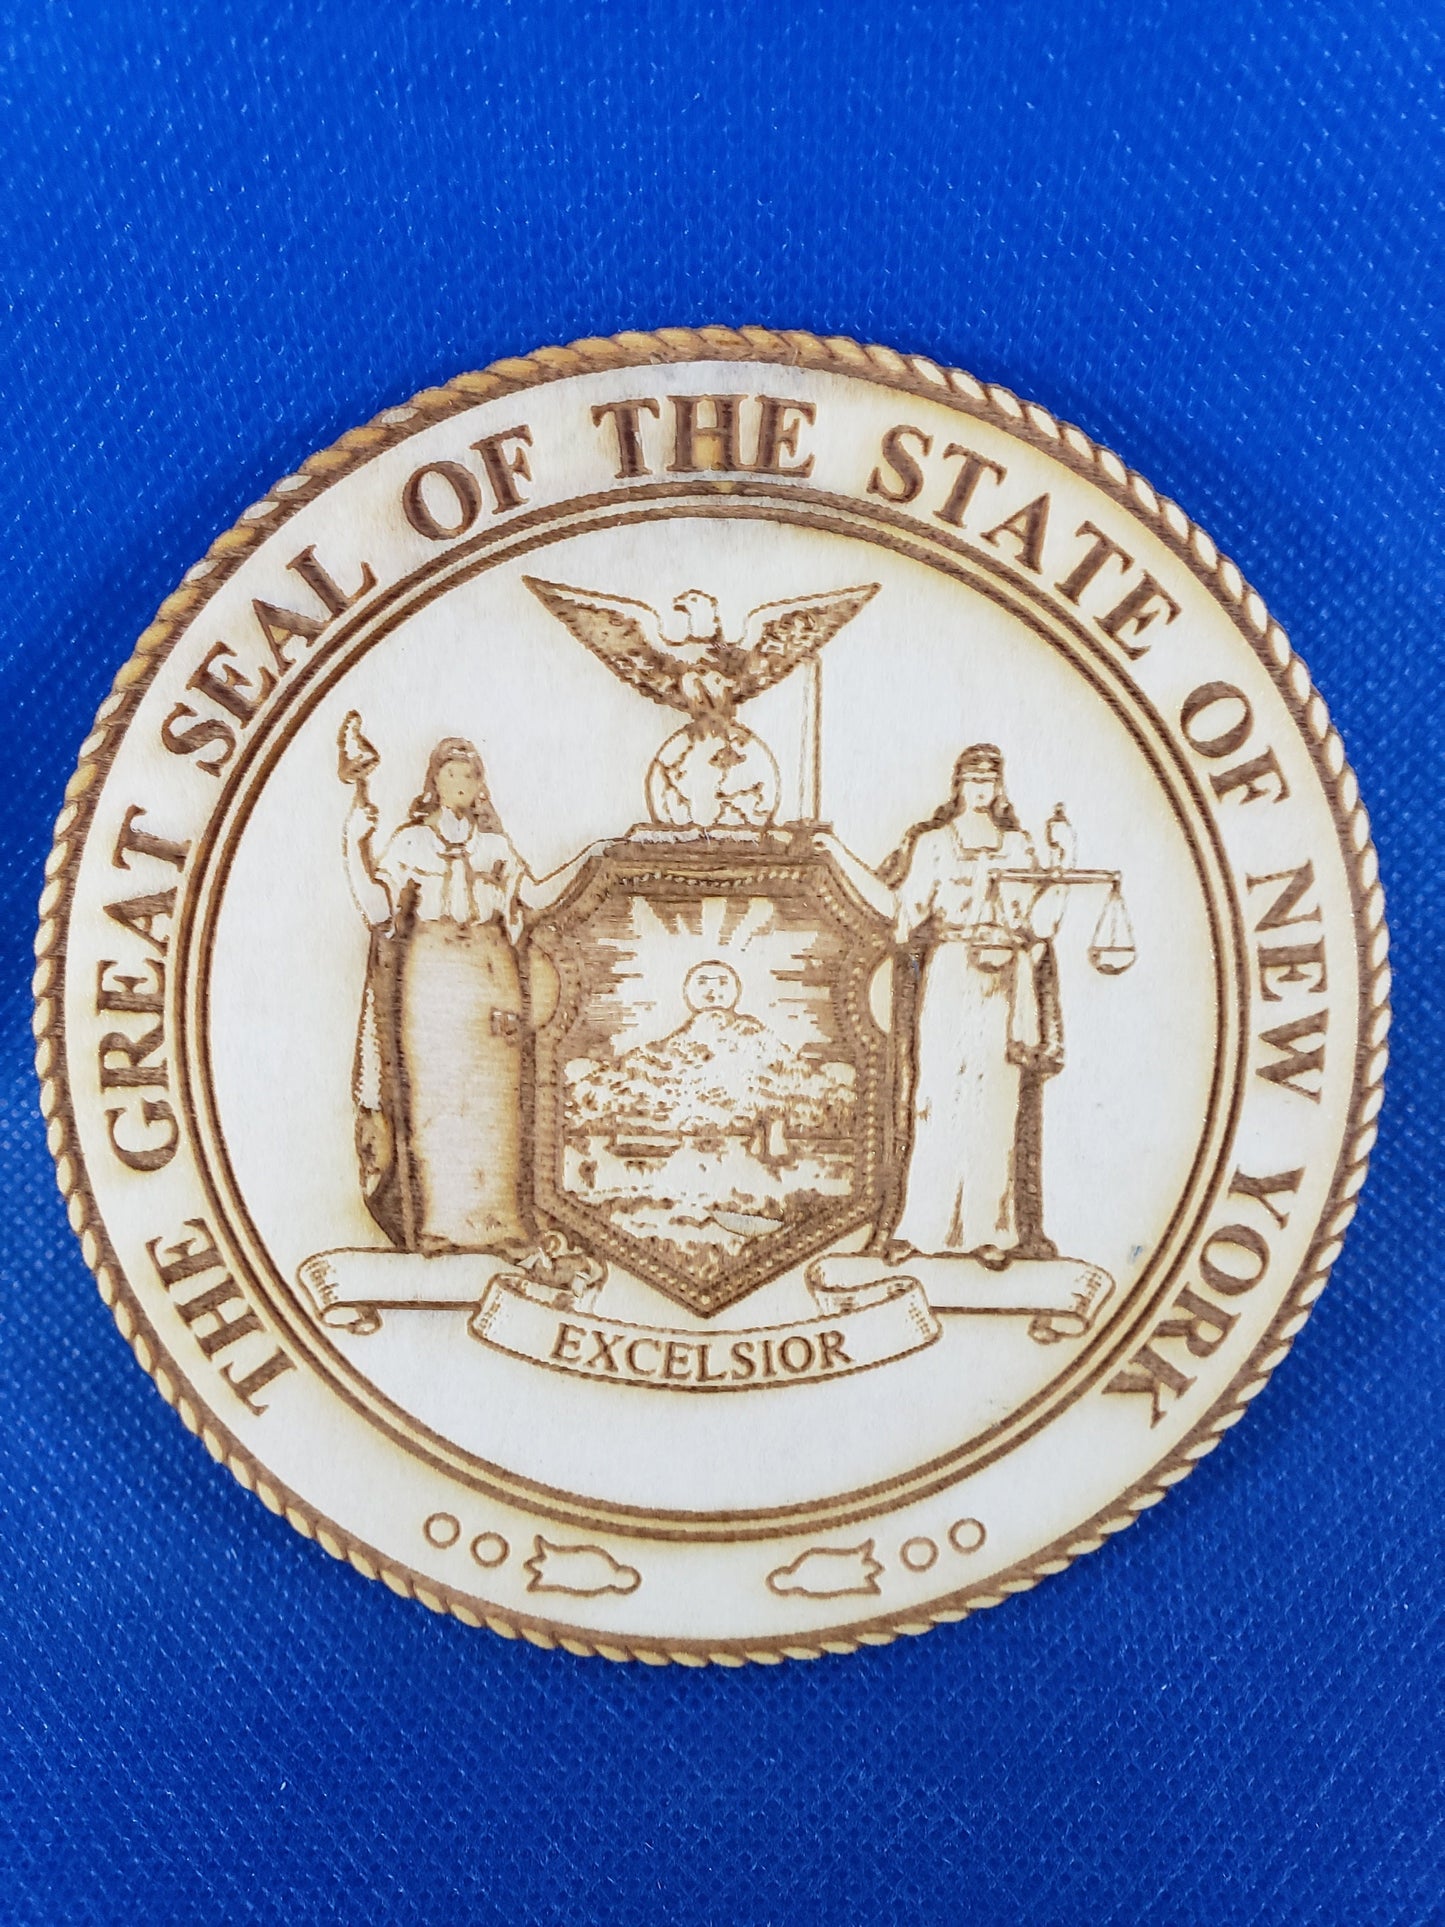 New York State Seal - Laser cut natural wooden blanks